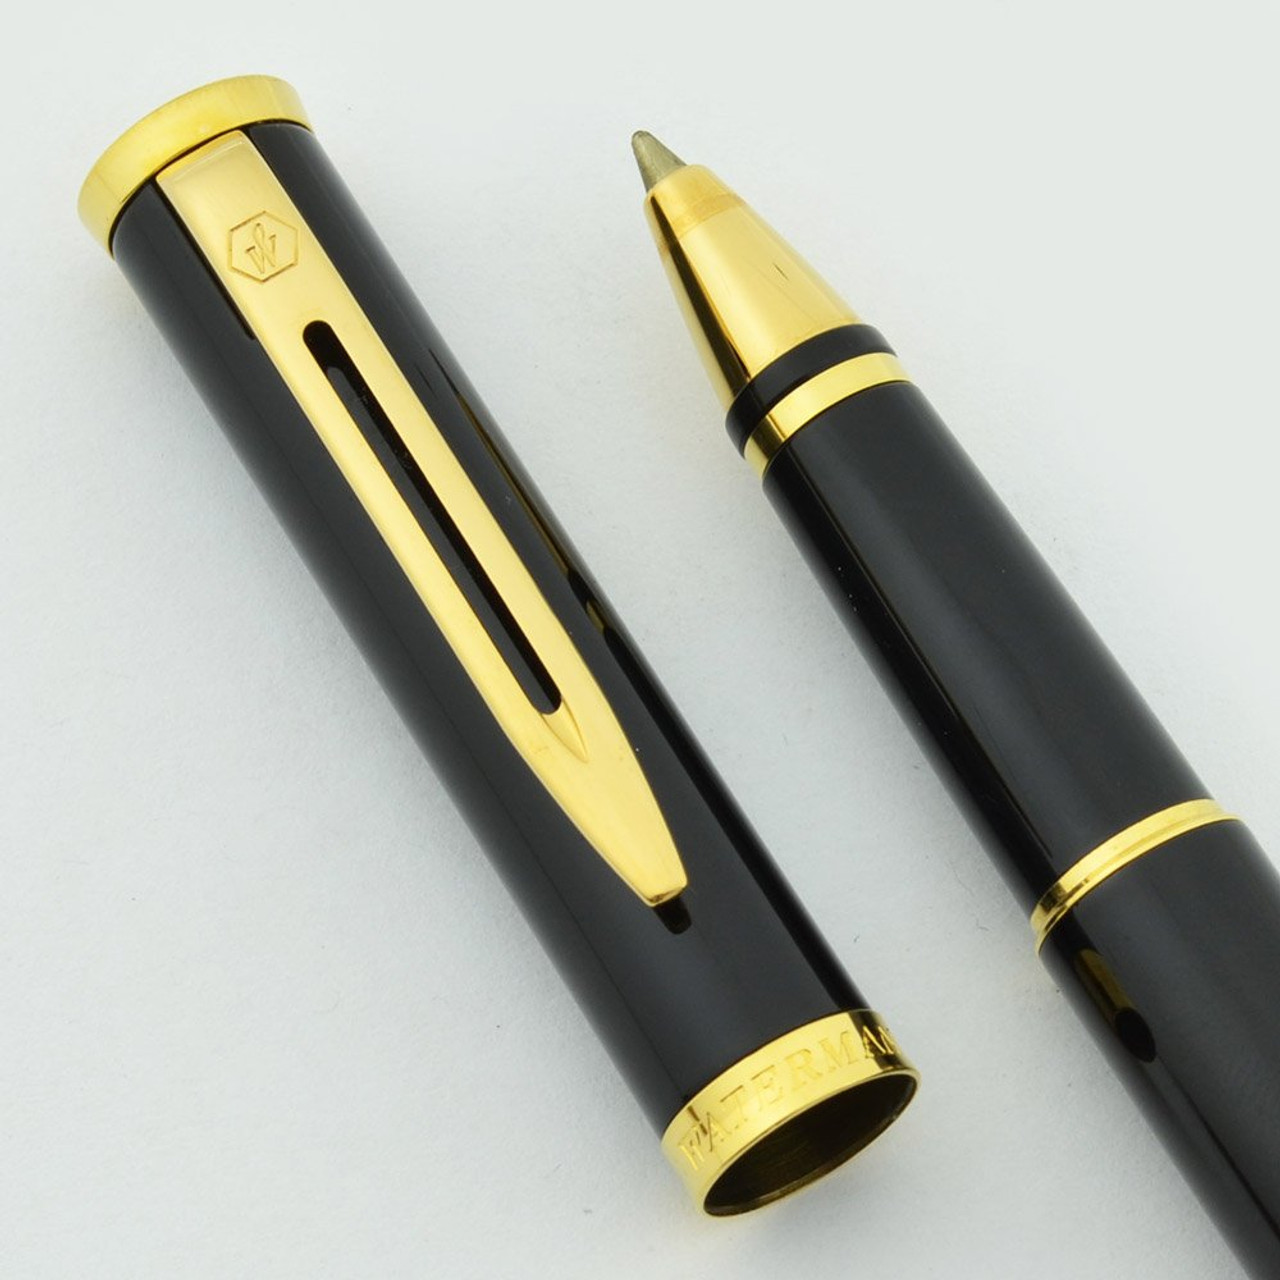 Waterman Preface Rollerball Pen - Black Lacquer, Gold Trim (New Old Stock)